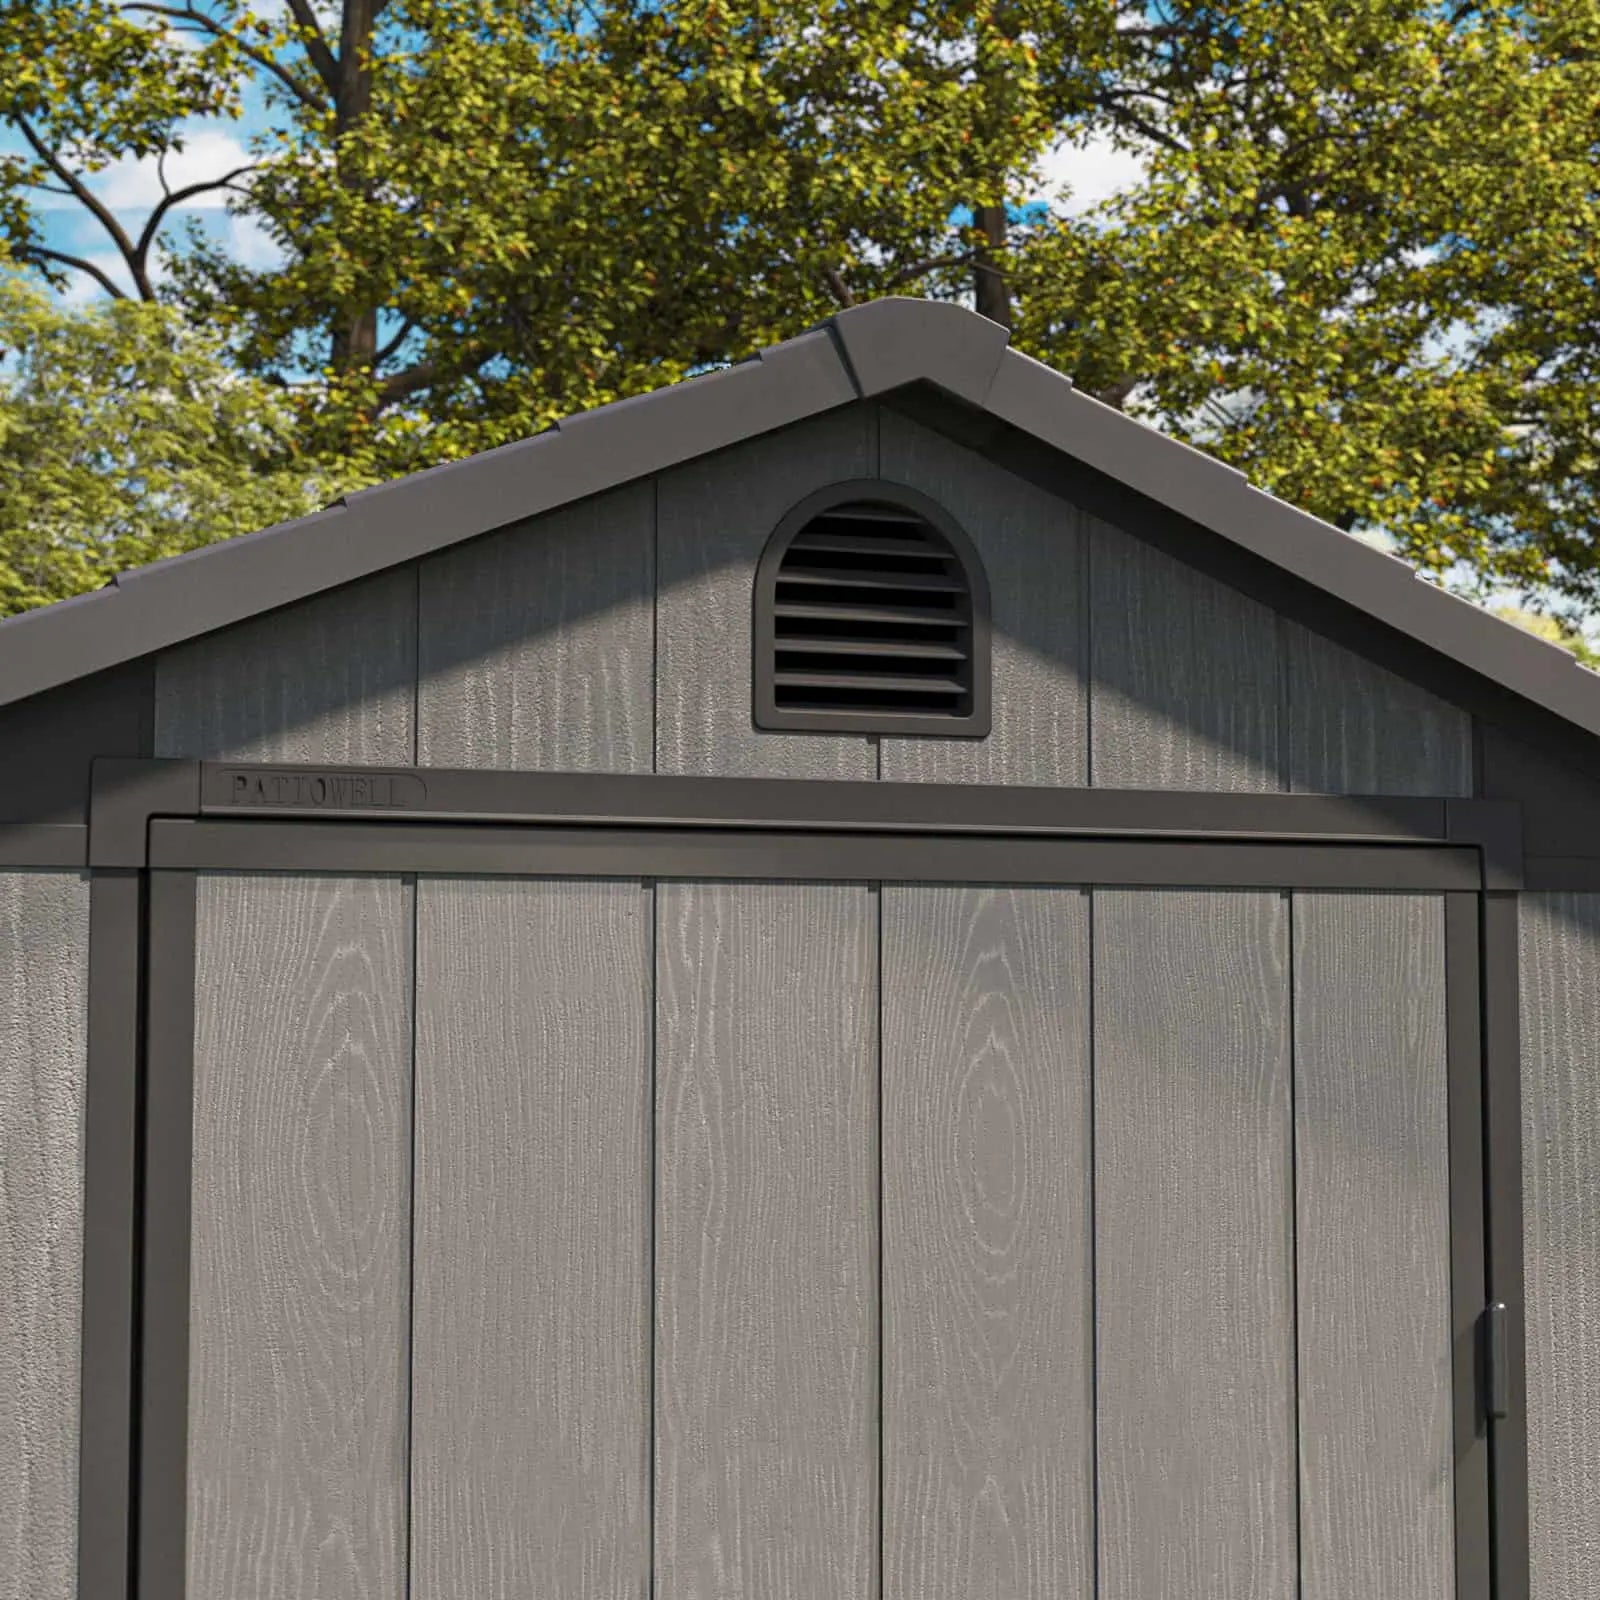 Patiowell 4x8 Plastic Storage Shed Pro-Air Vents